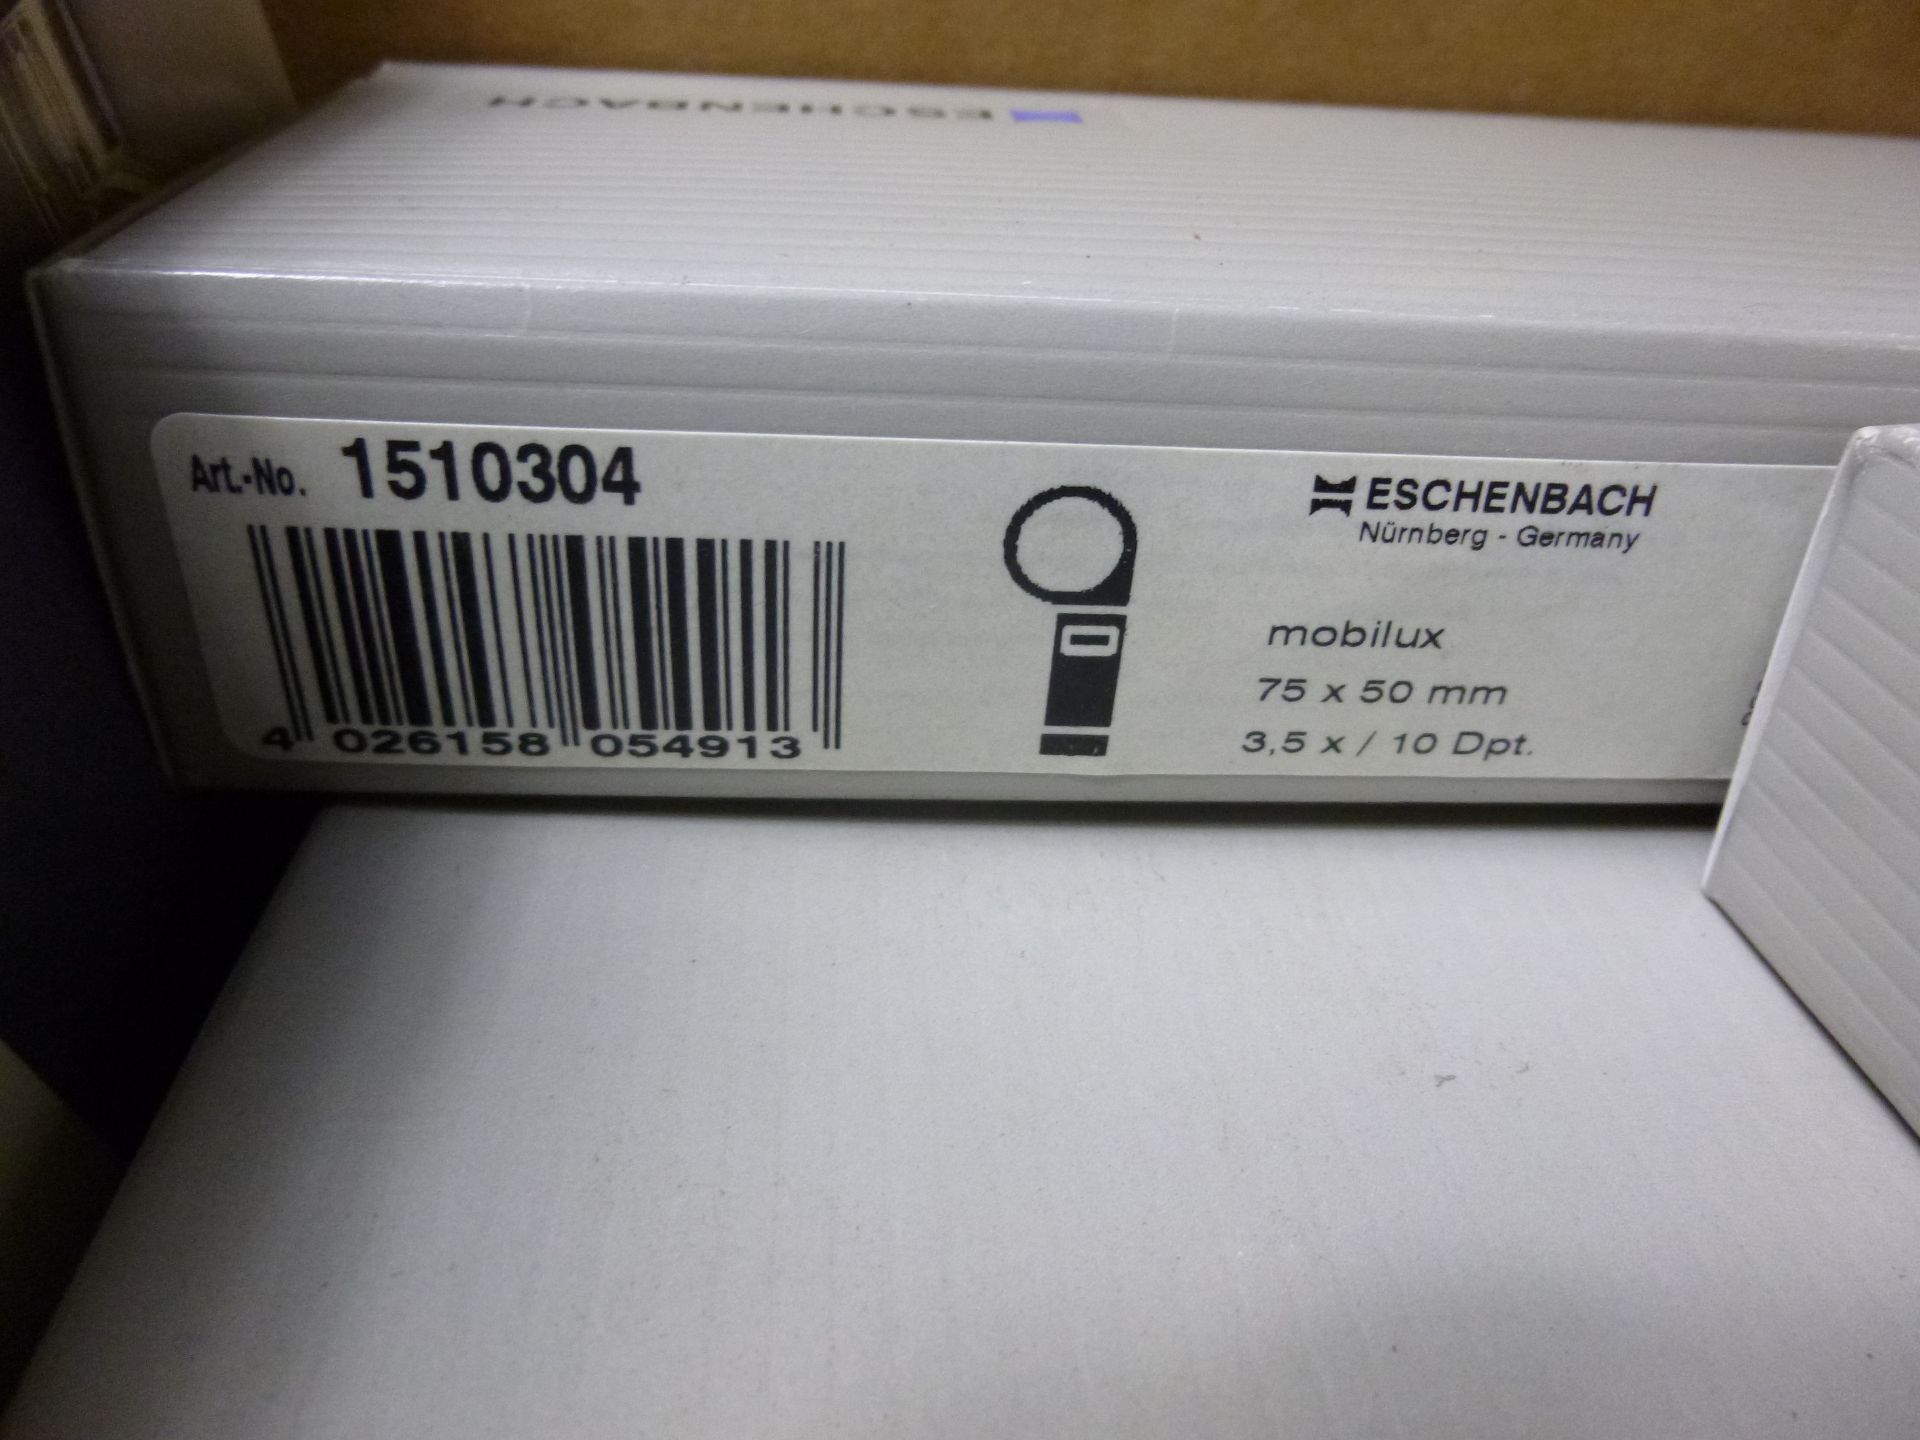 Lot of new Eschenbach optica loops magnifying glasses etc (new in boxes) Shipping can be prepared - Image 6 of 9